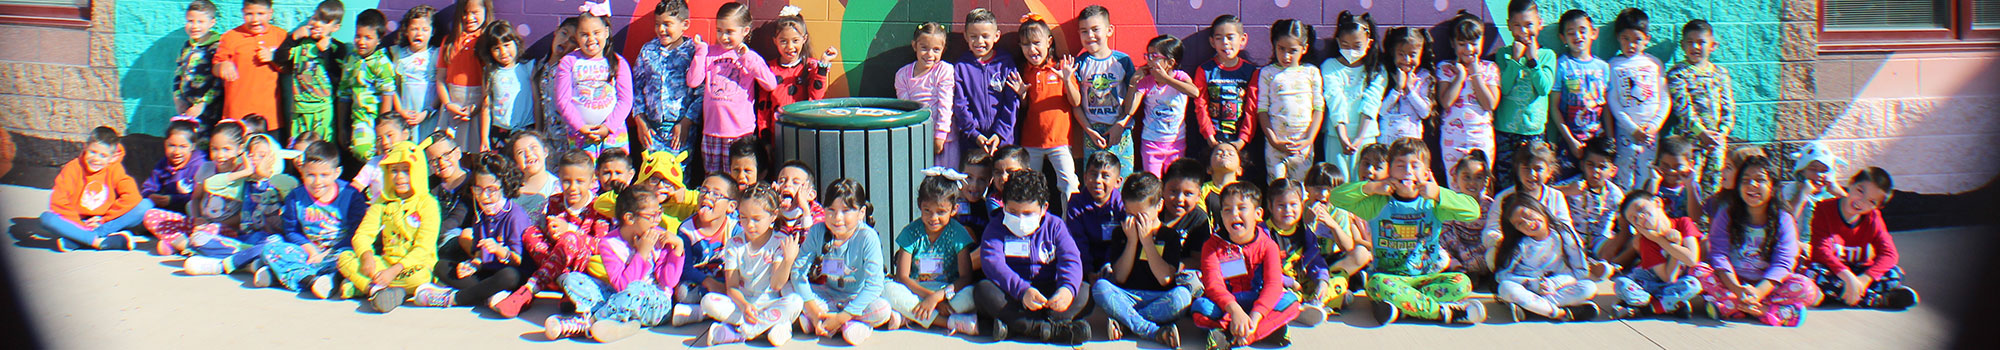 Big group of students posing in front of a mural